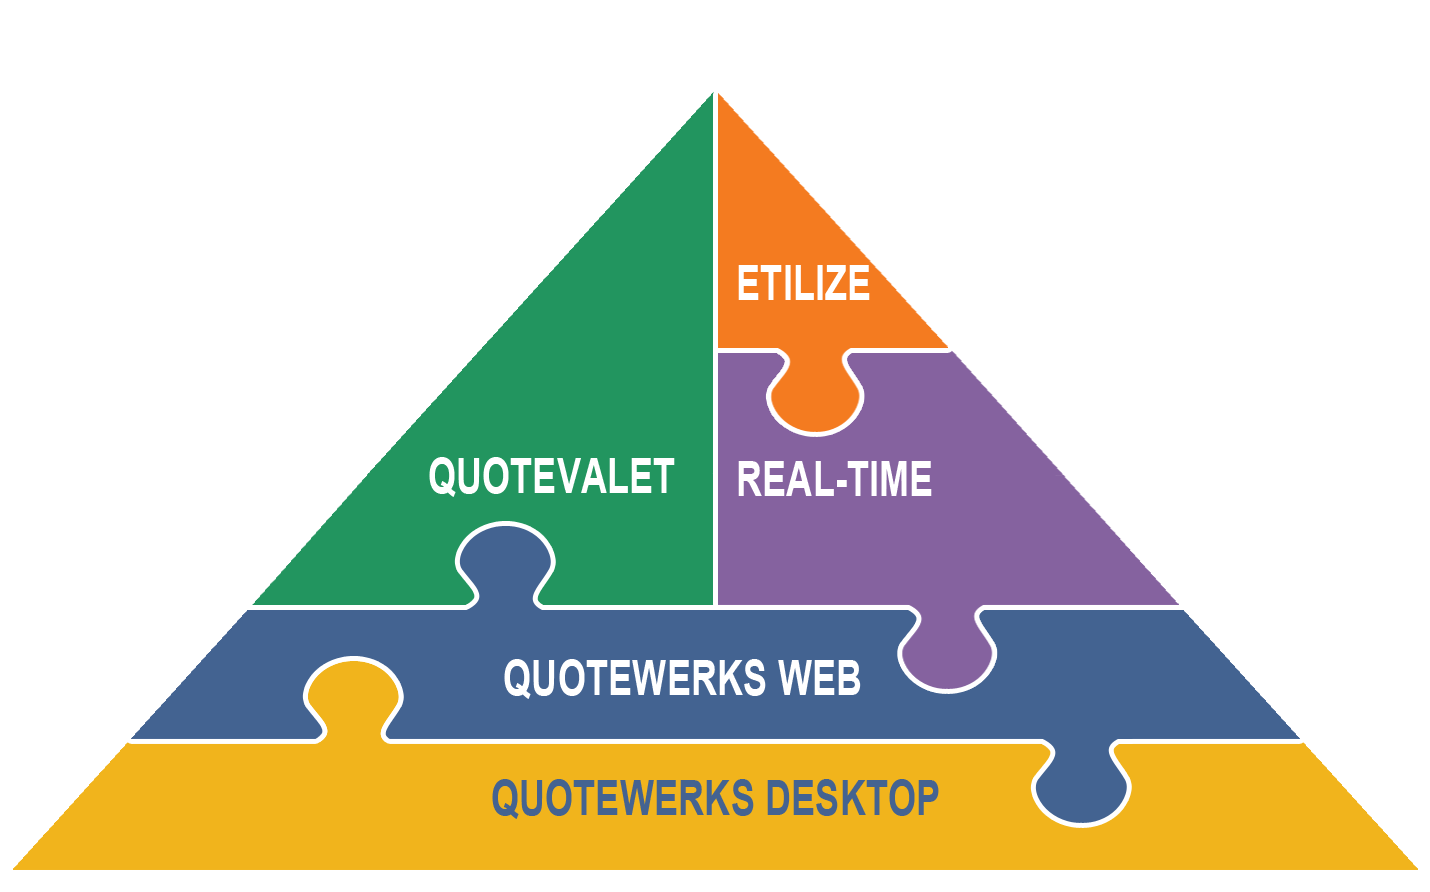 Do you quote or use products or services from Kaseya, GFI, Labtech, Chartec, Cisco, Intronis, Level Platforms, N-Able, Reflexion, SpamSoap, Zenith or others? Managed Service Providers (MSPs) use QuoteWerks with PSAs like Autotask, CommitCRM, ConnectWise, and TigerPaw to create quotes and proposals when bidding on recurring revenue (RMM) jobs for Hosting, Backup, Cloud Services, etc.